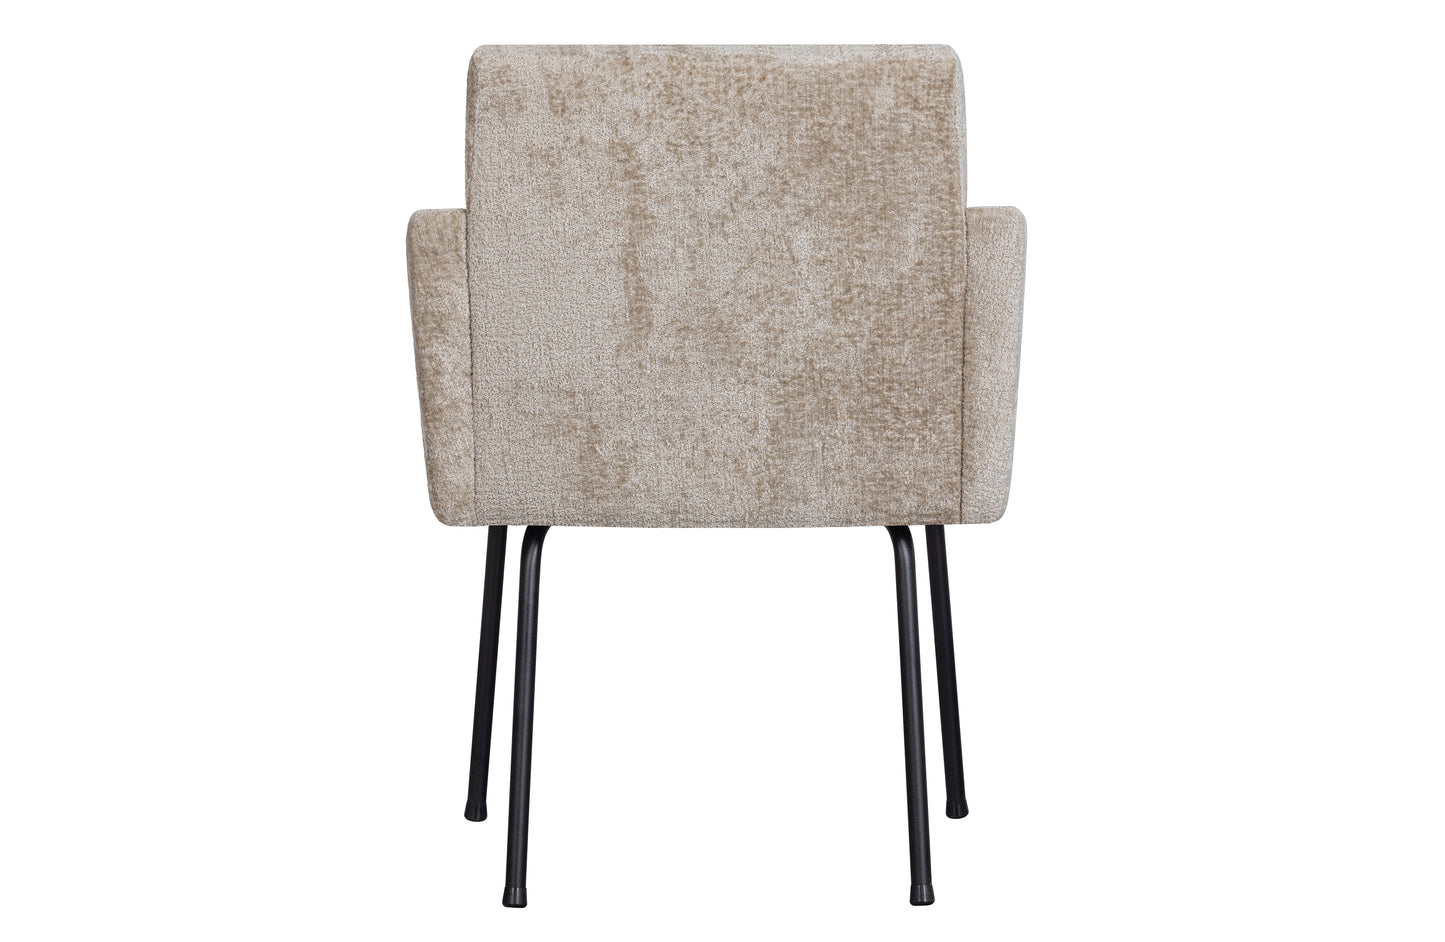 Mount Dining Chair With Armrest Coarse Woven Fabric Natural